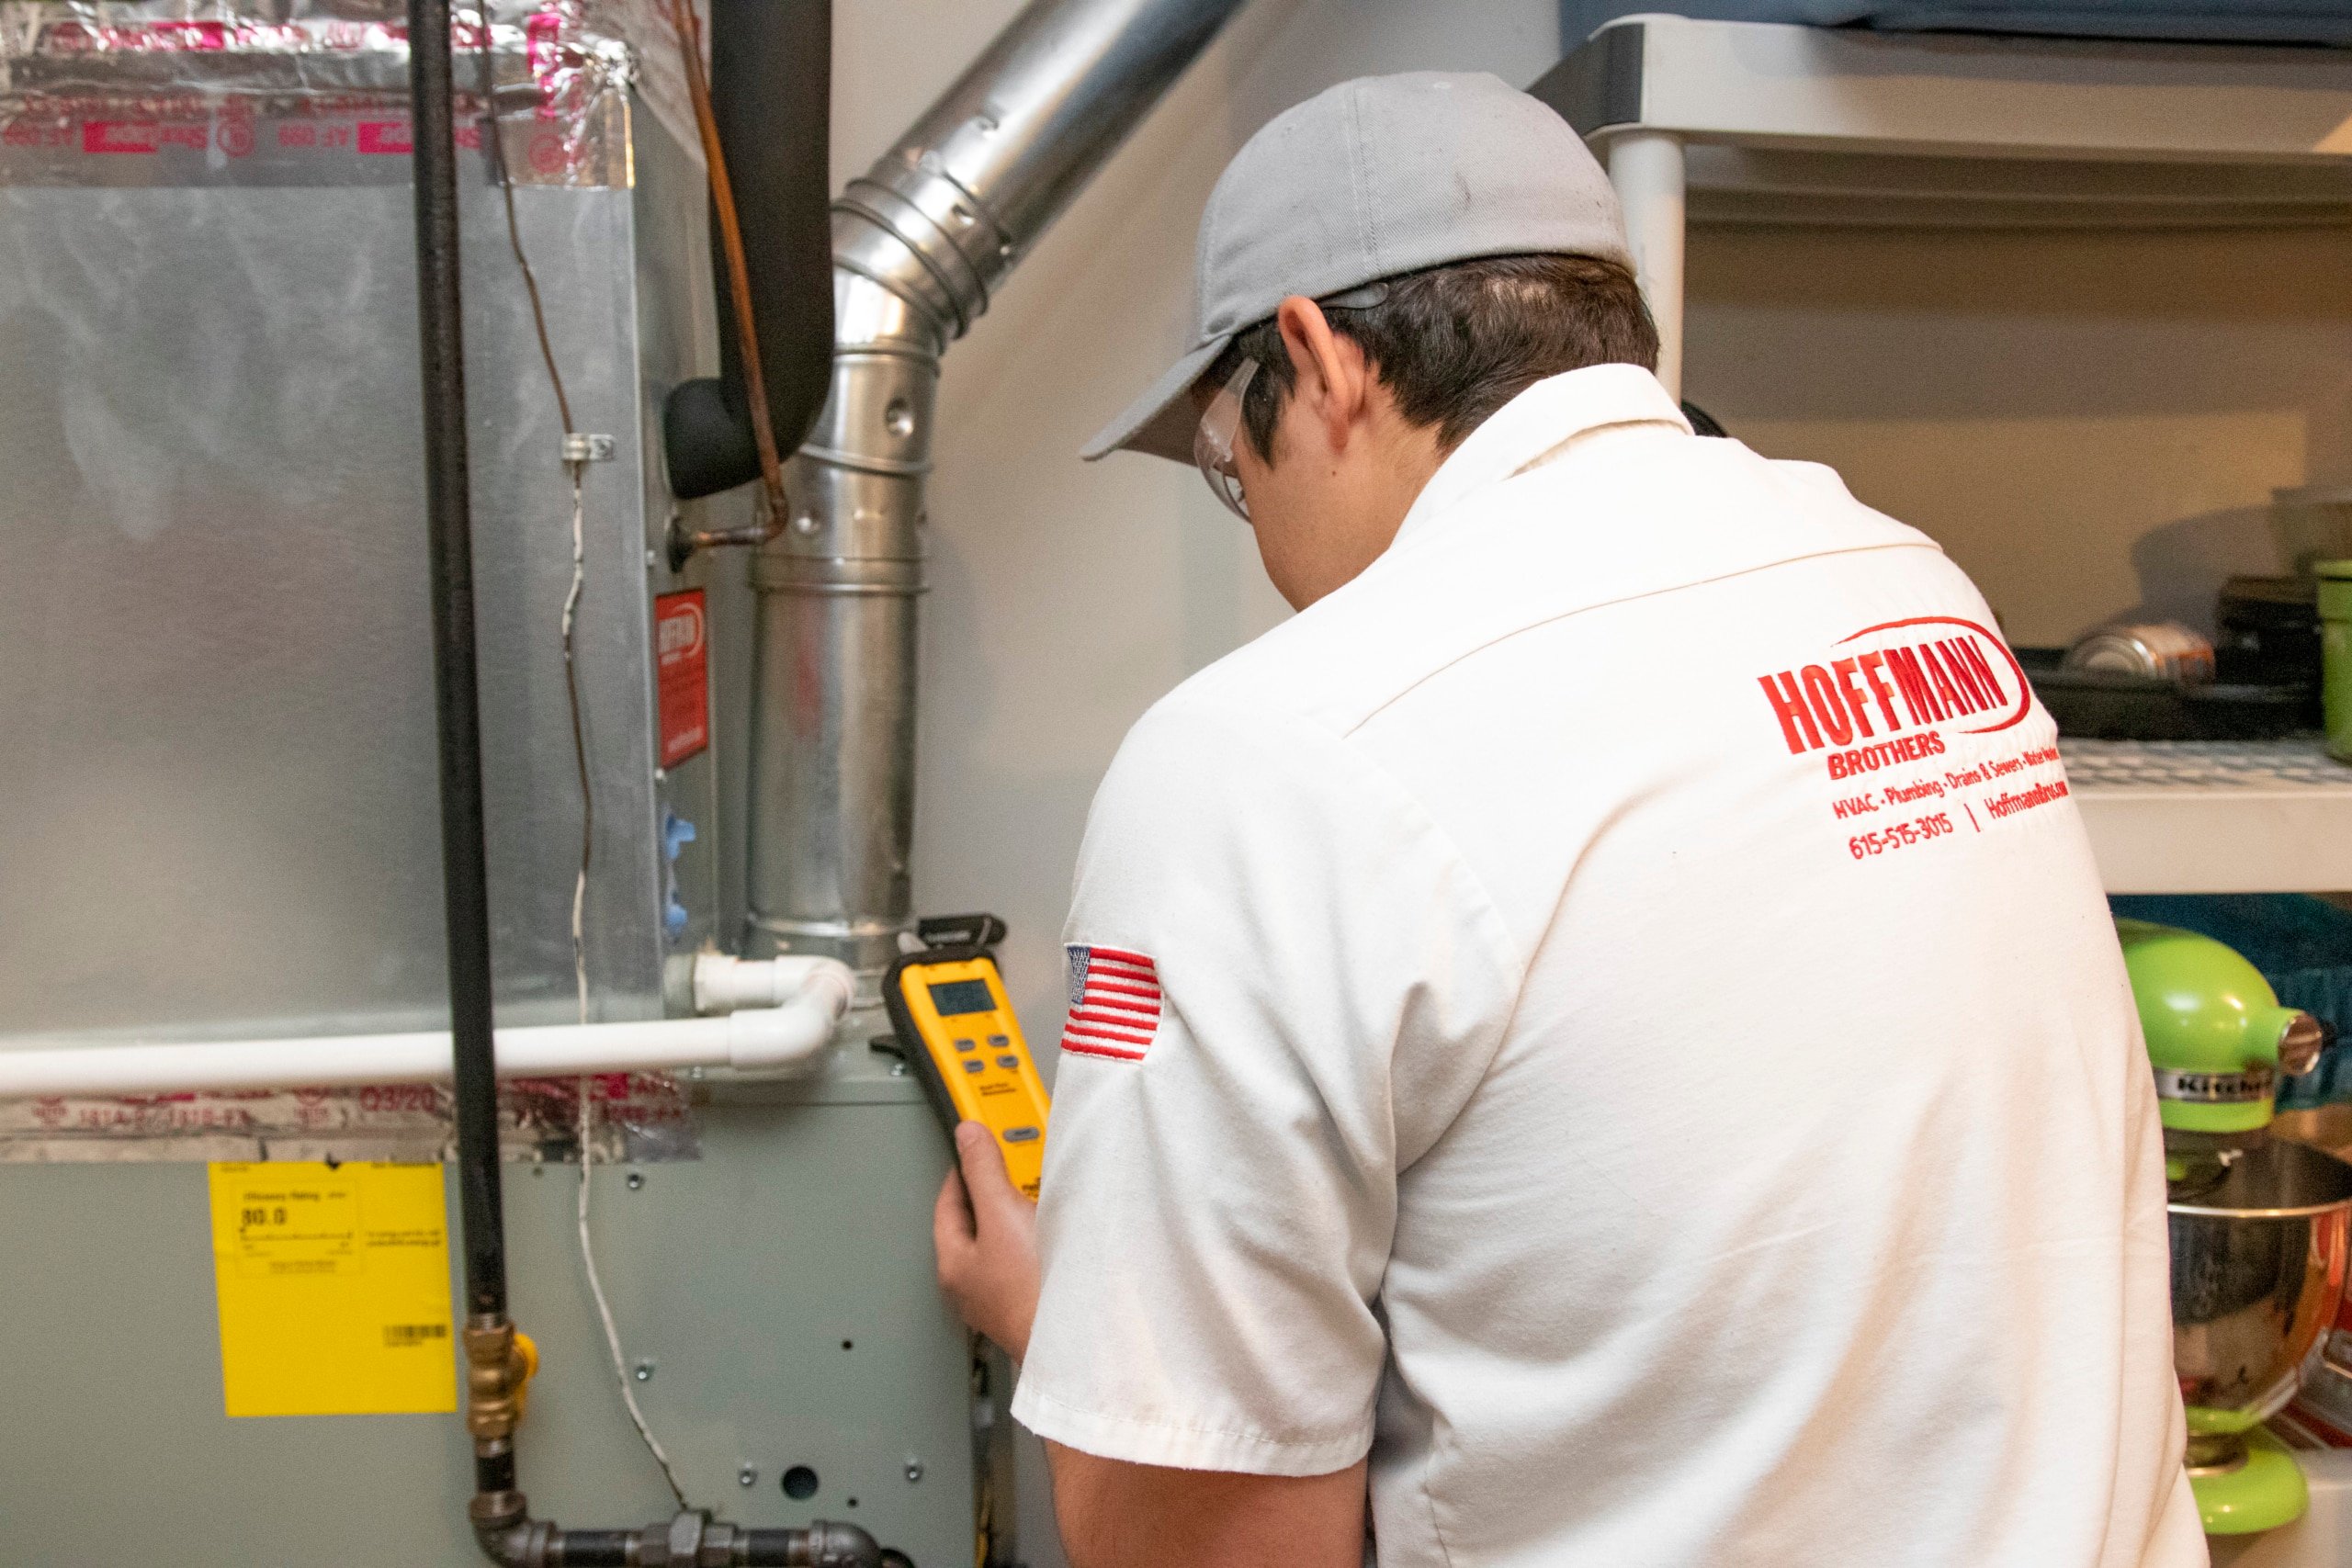 Furnace Repair Services By Hoffmann Brothers’ Technicians In Nashville, TN